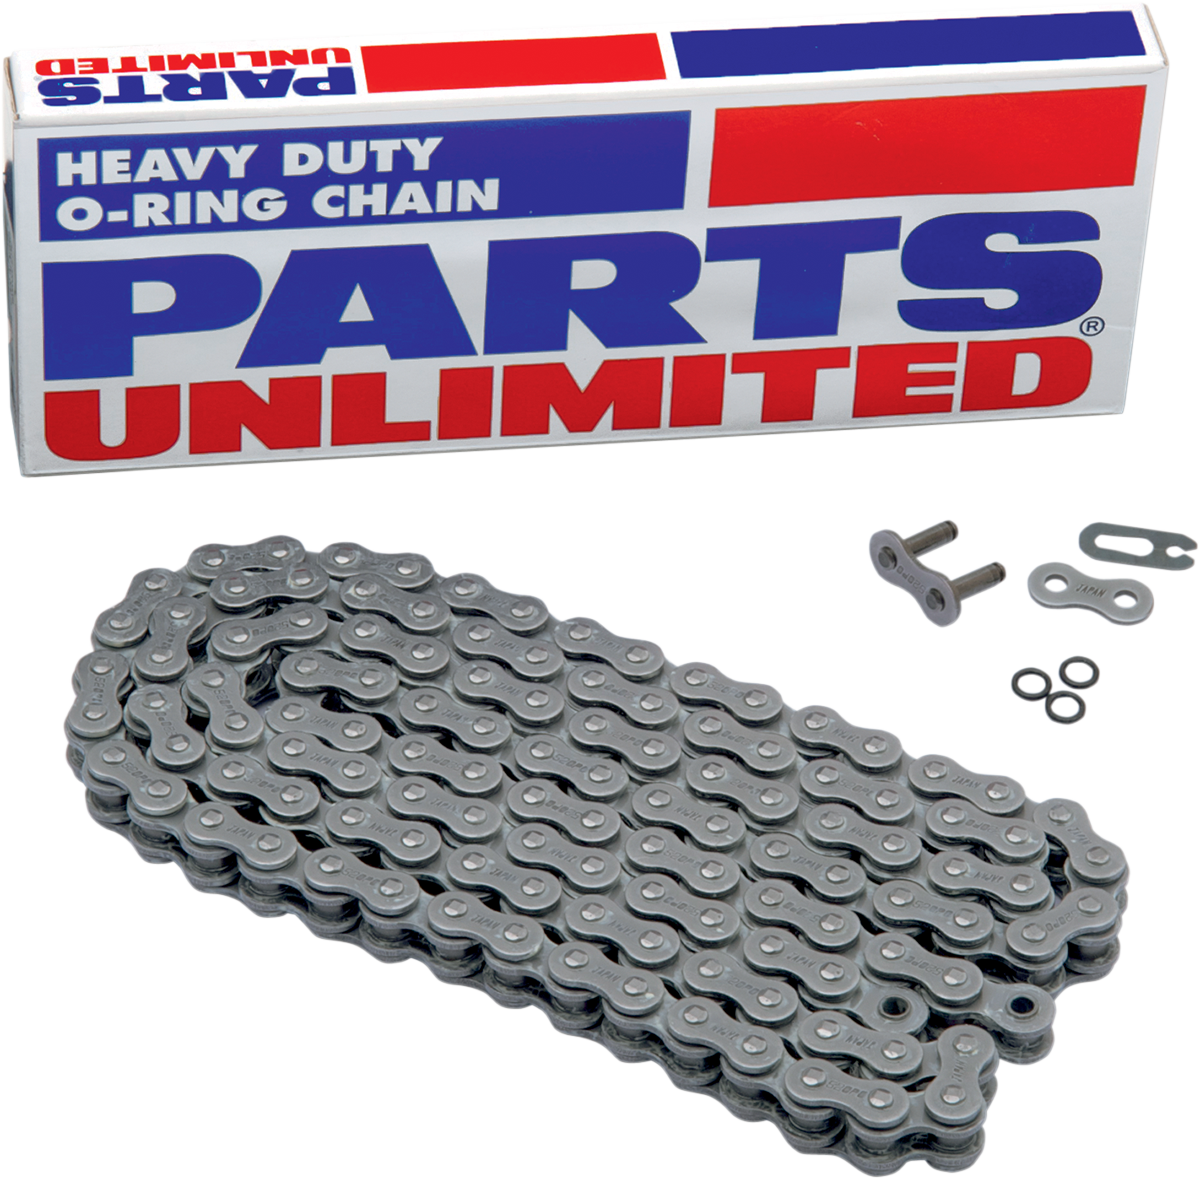 PARTS UNLIMITED-CHAIN MOTORCYCLE CHAIN CHAIN PU 530 O-RNG X 100L